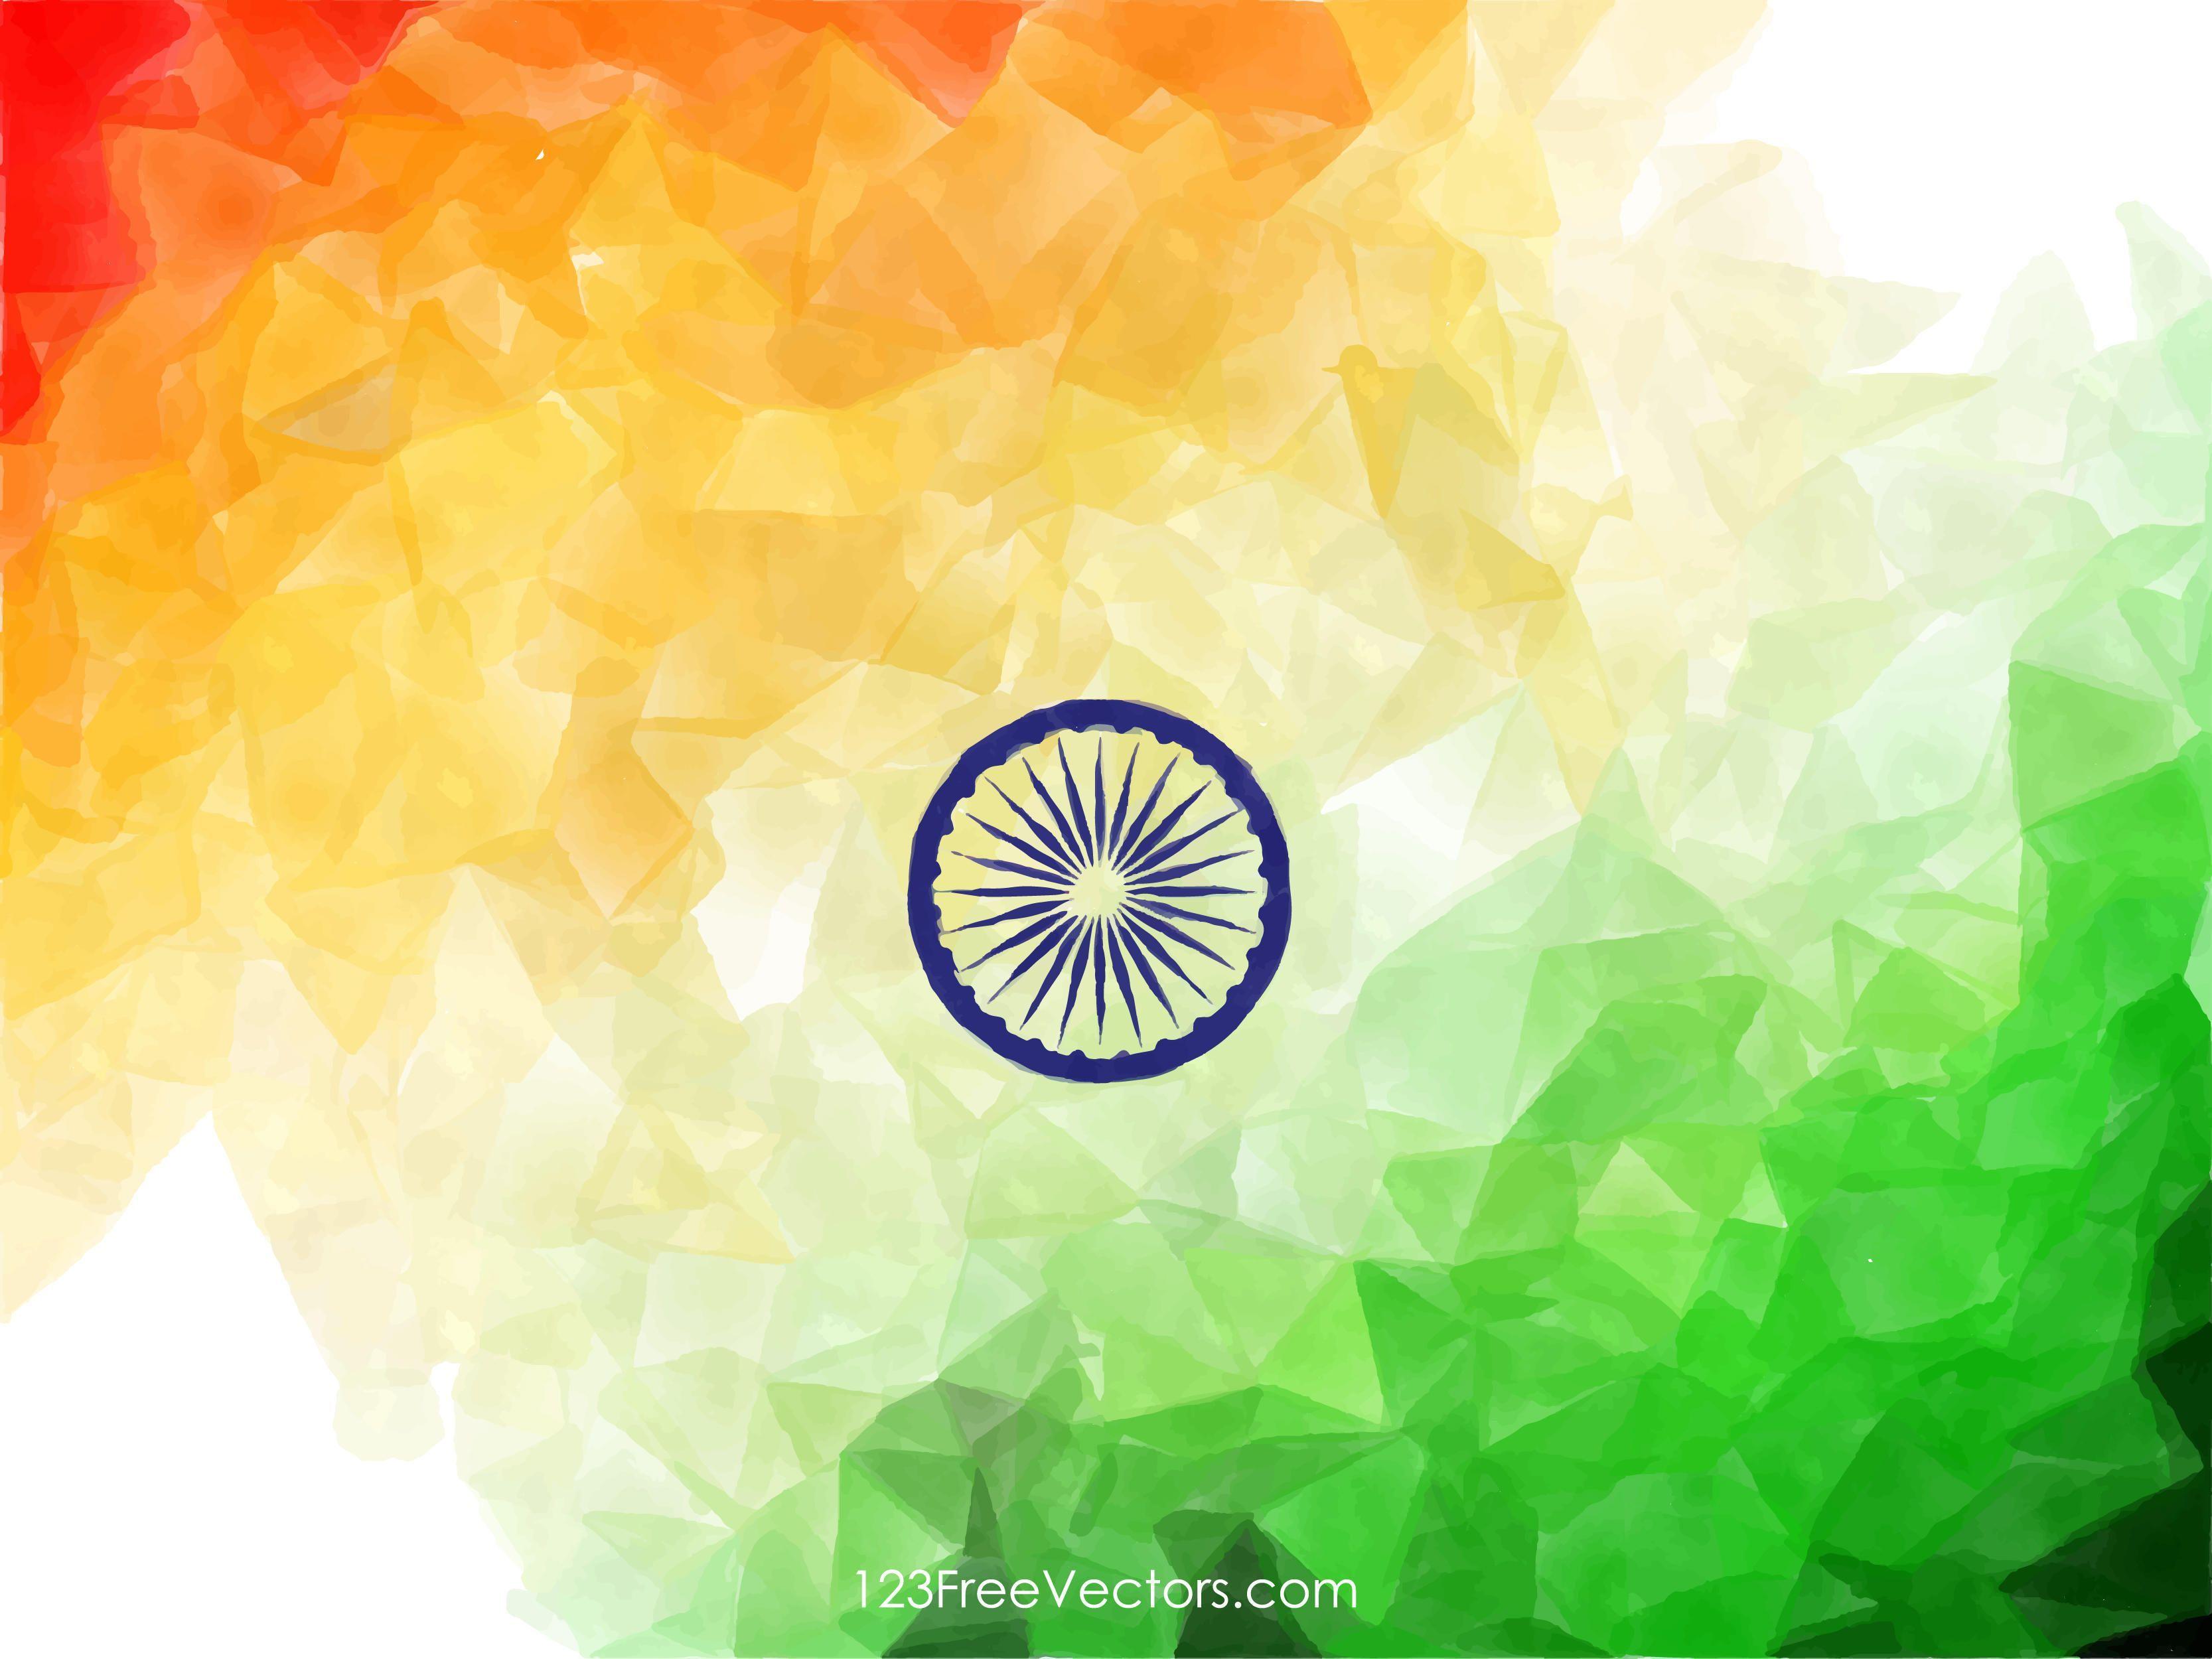 Indian Flag Colour Wallpapers - Wallpaper Cave